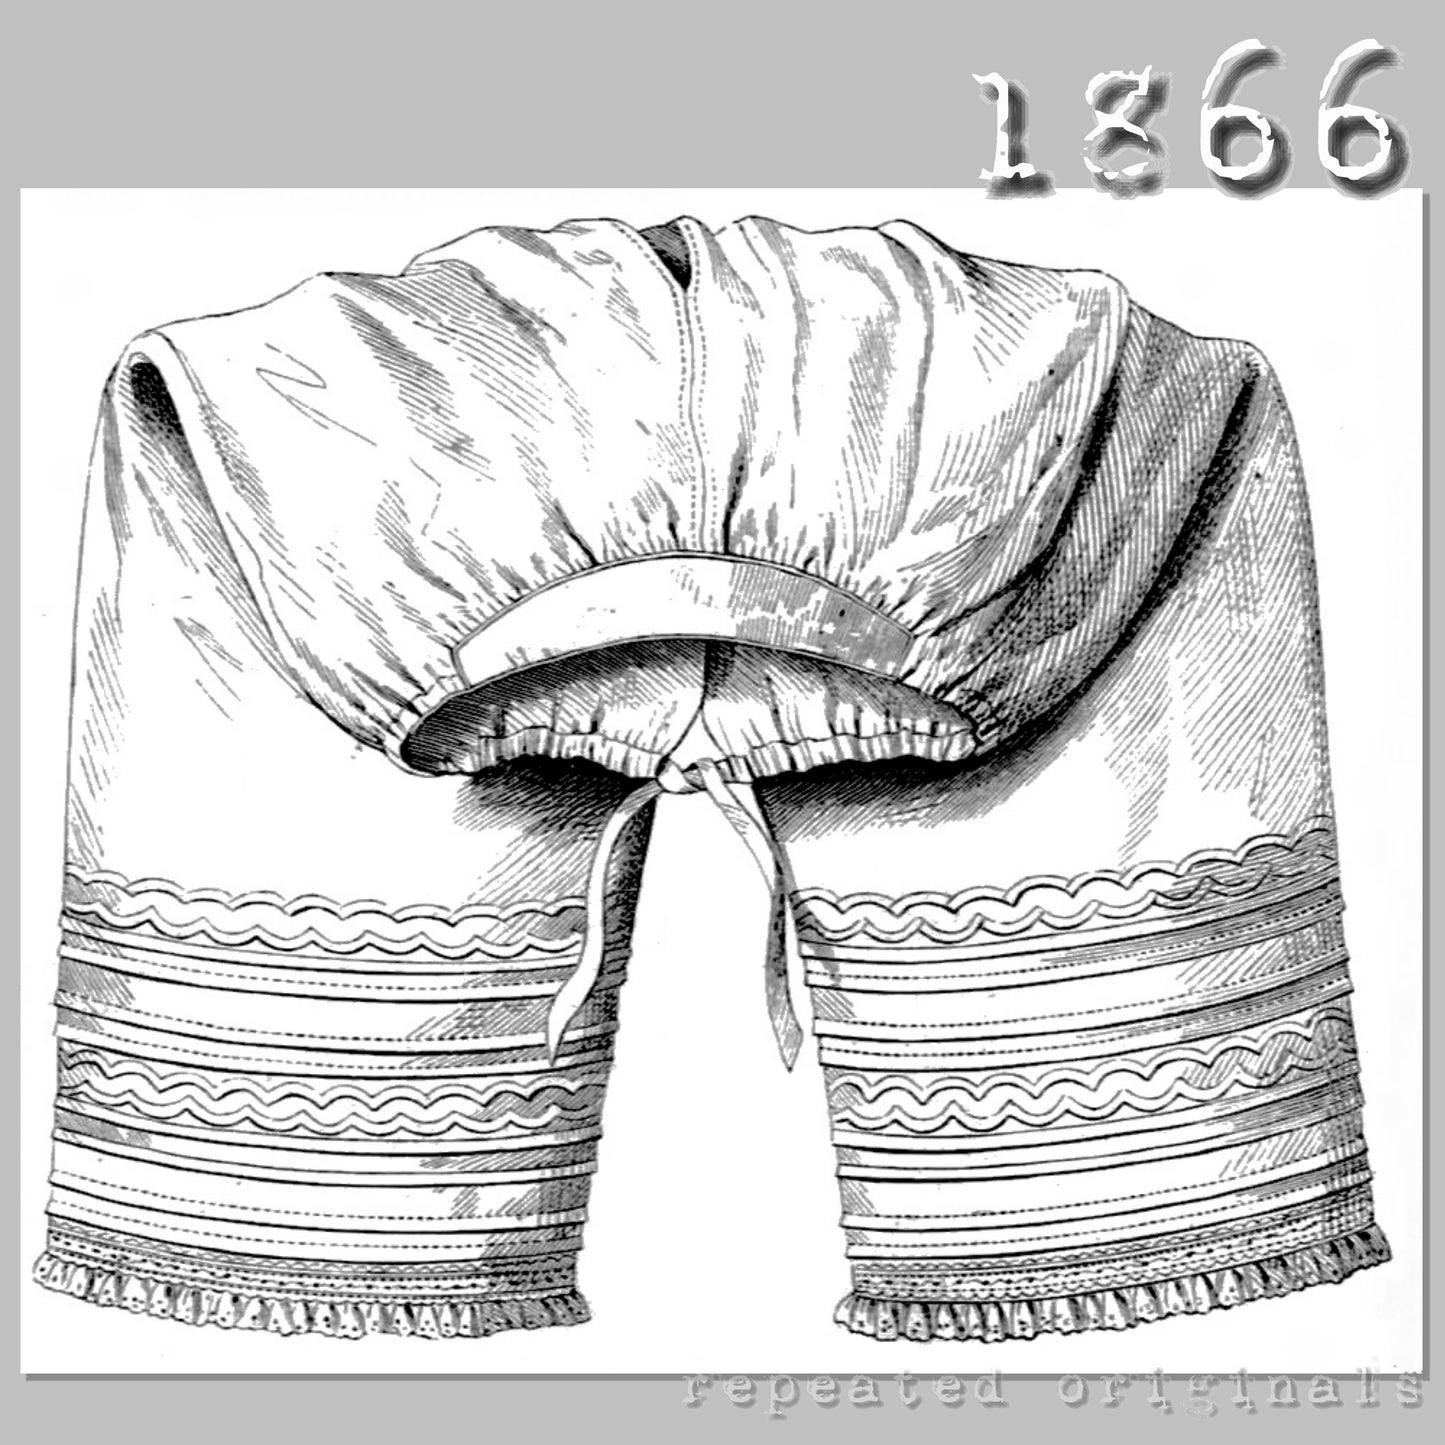 1866 Drawers for Women Sewing Pattern - INSTANT DOWNLOAD PDF